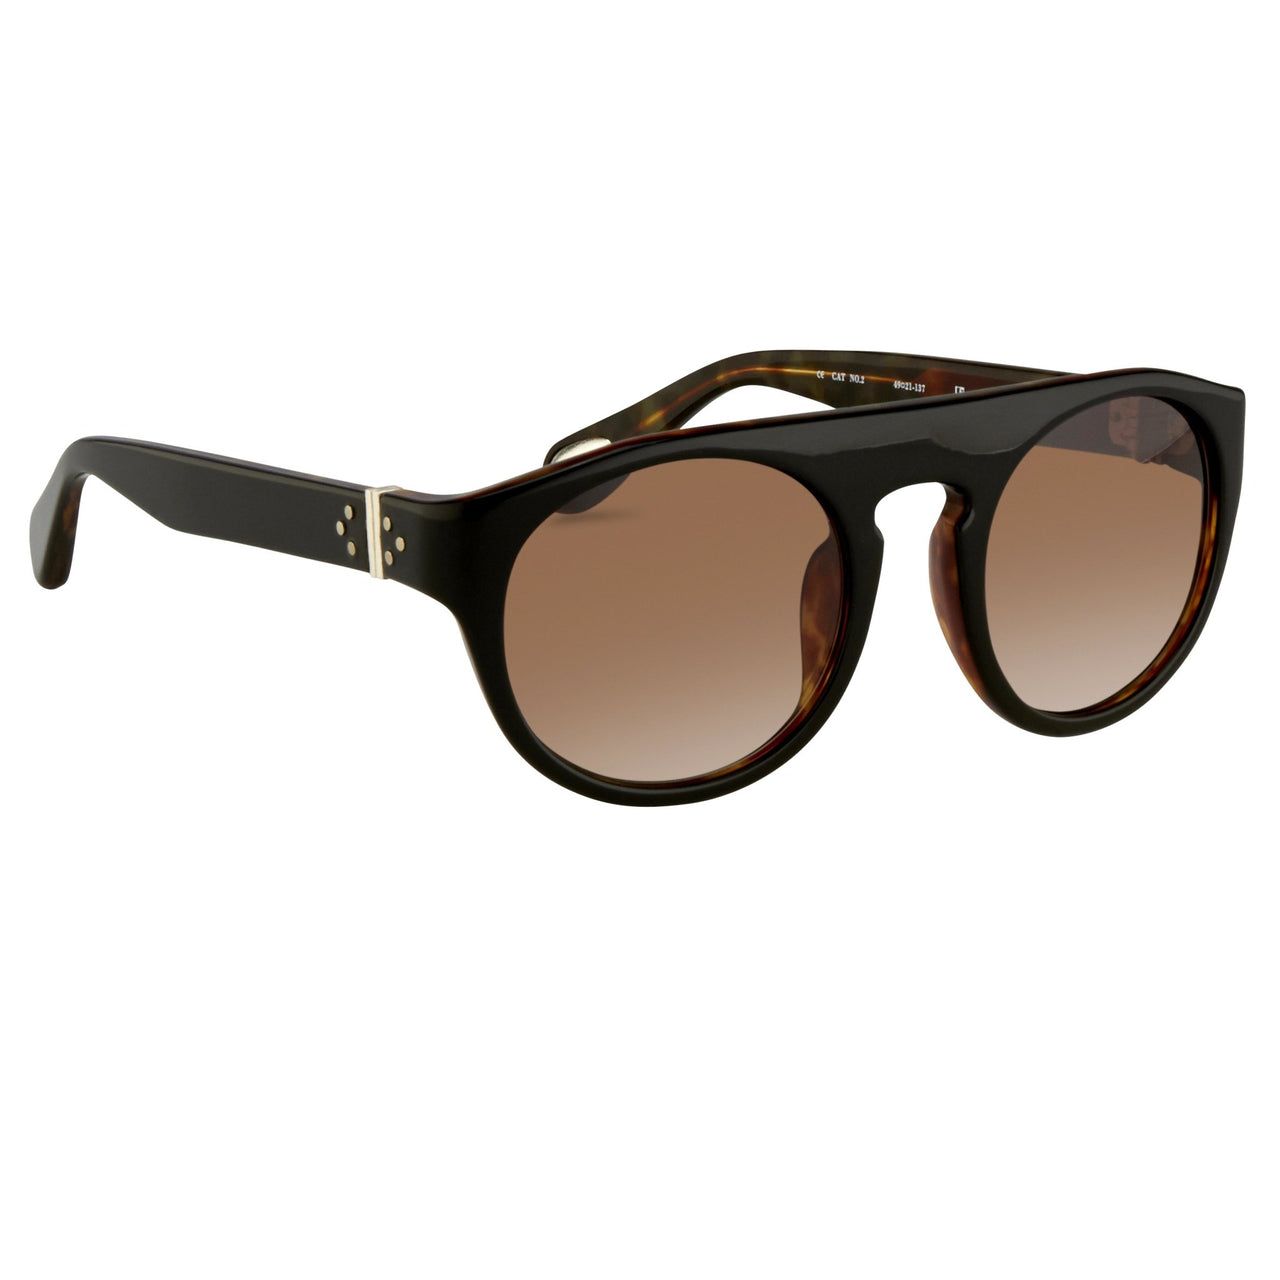 Ann Demeulemeester Sunglasses Flat Top Black & Tortoise Shell 925 Silver with Brown Graduated Lenses Category 3 AD10C6SUN - Watches & Crystals